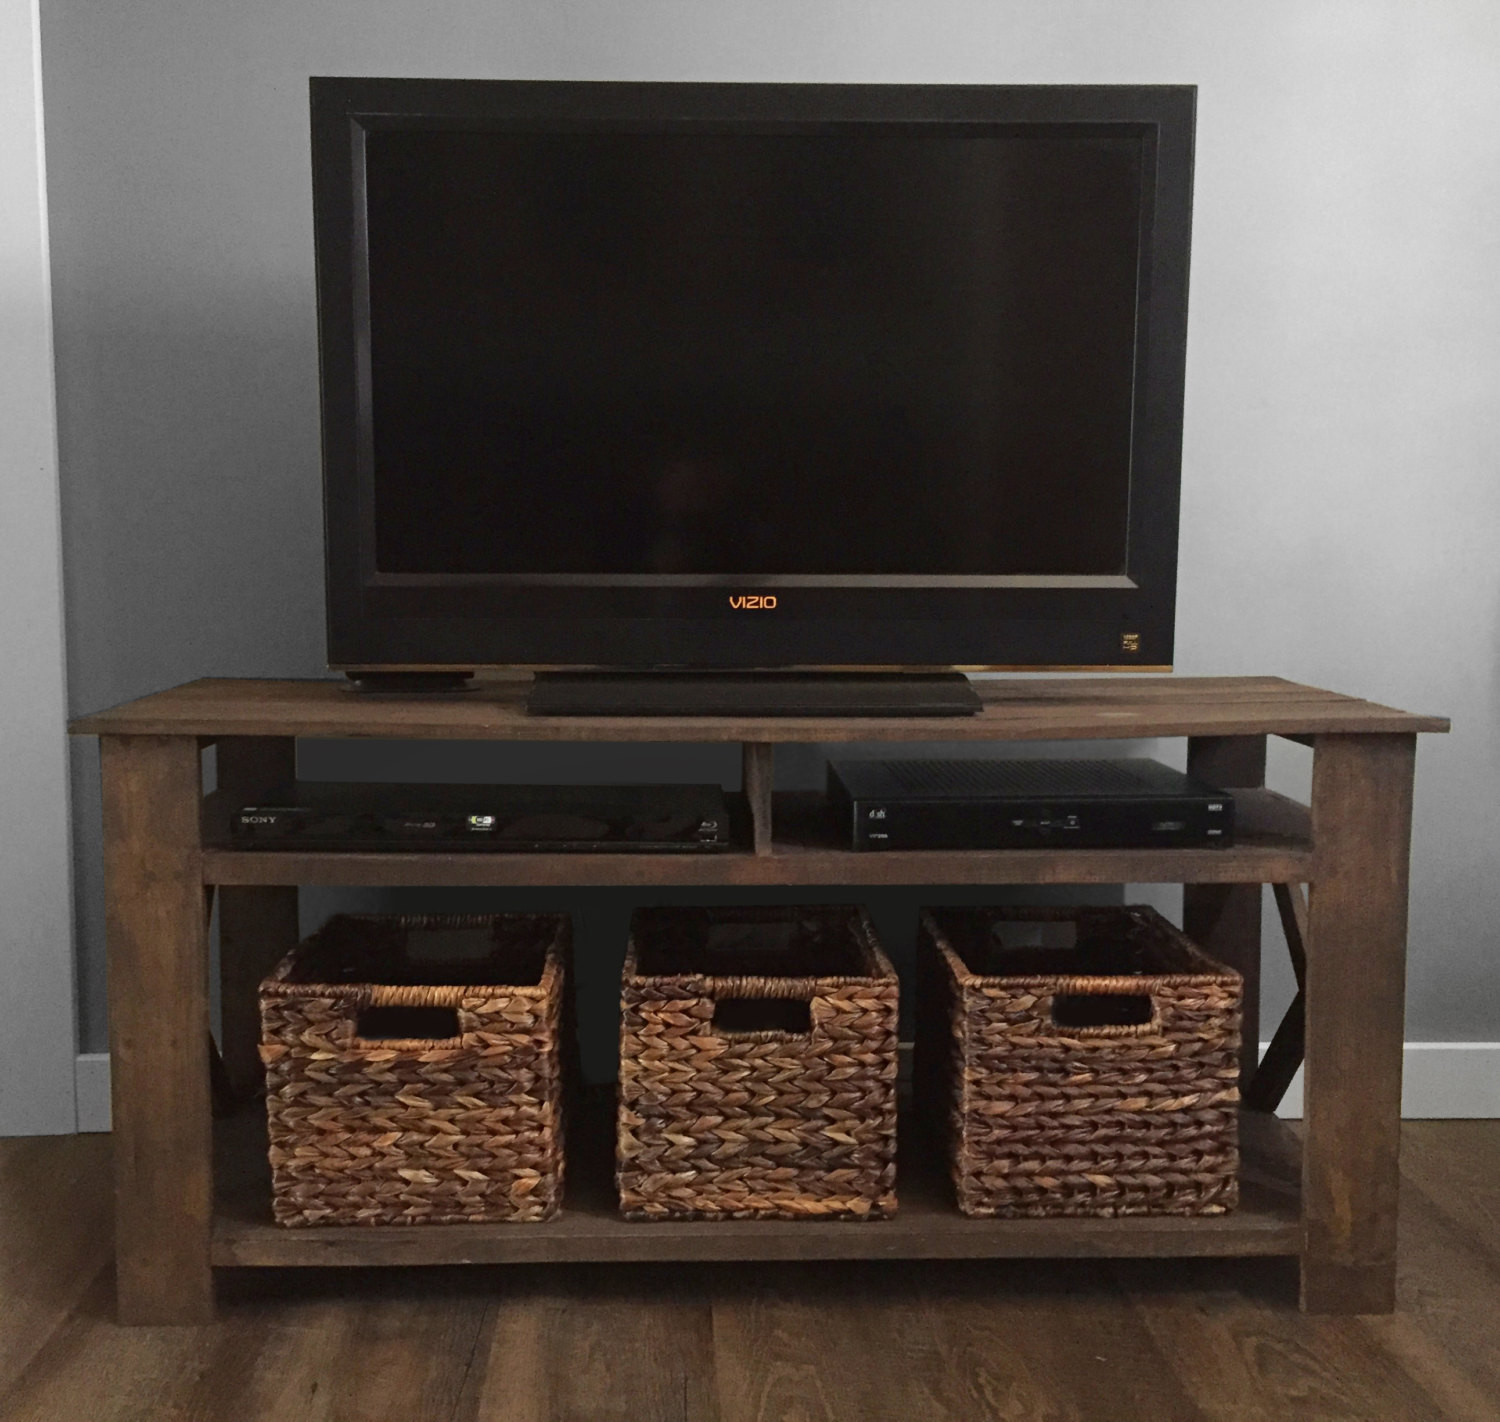 DIY Rustic Tv Stand Plans
 DIY Pallet TV Stand Plans from CahillsCreative on Etsy Studio